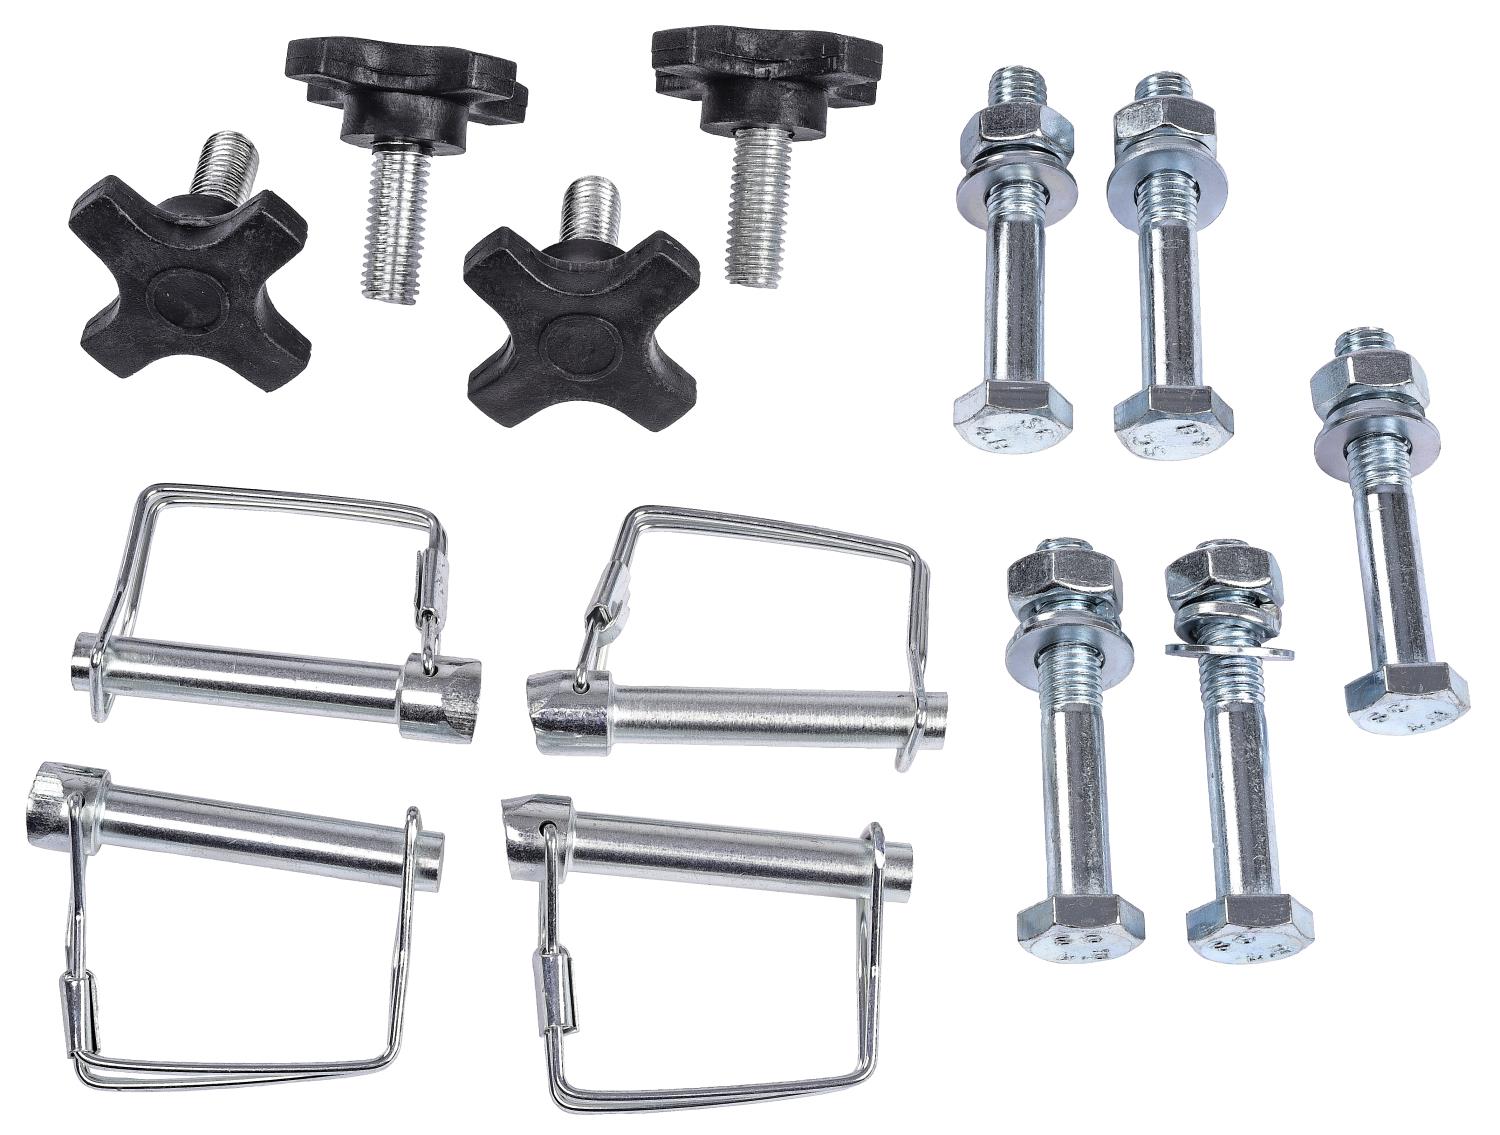 Replacement Hardware Kit for Truck Bed Lift 555-81244